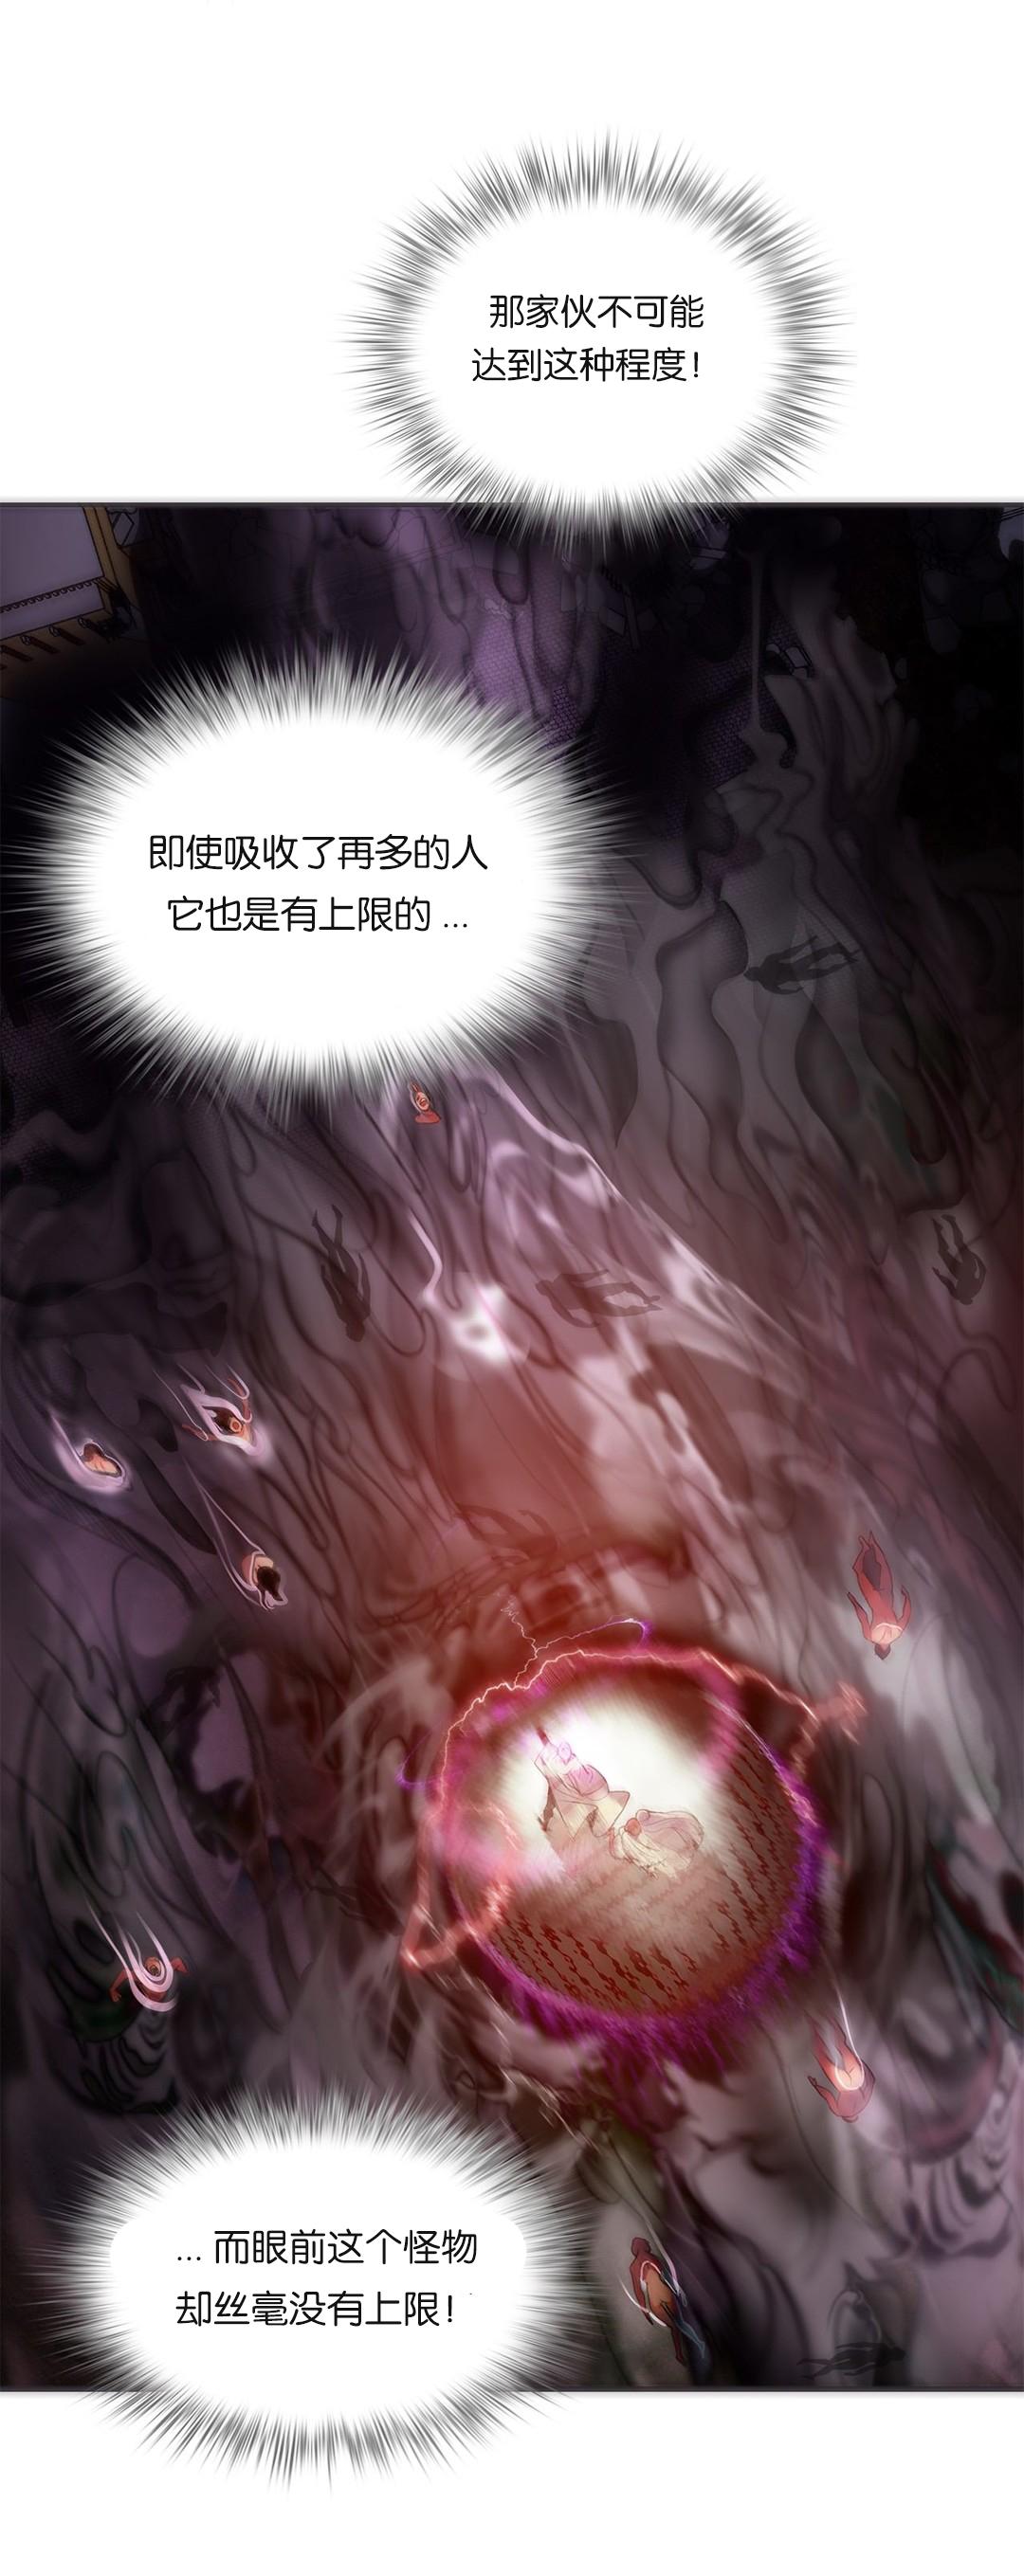 [Juder] Lilith`s Cord (第二季) Ch.61-65 [Chinese] [aaatwist个人汉化] [Ongoing] 21